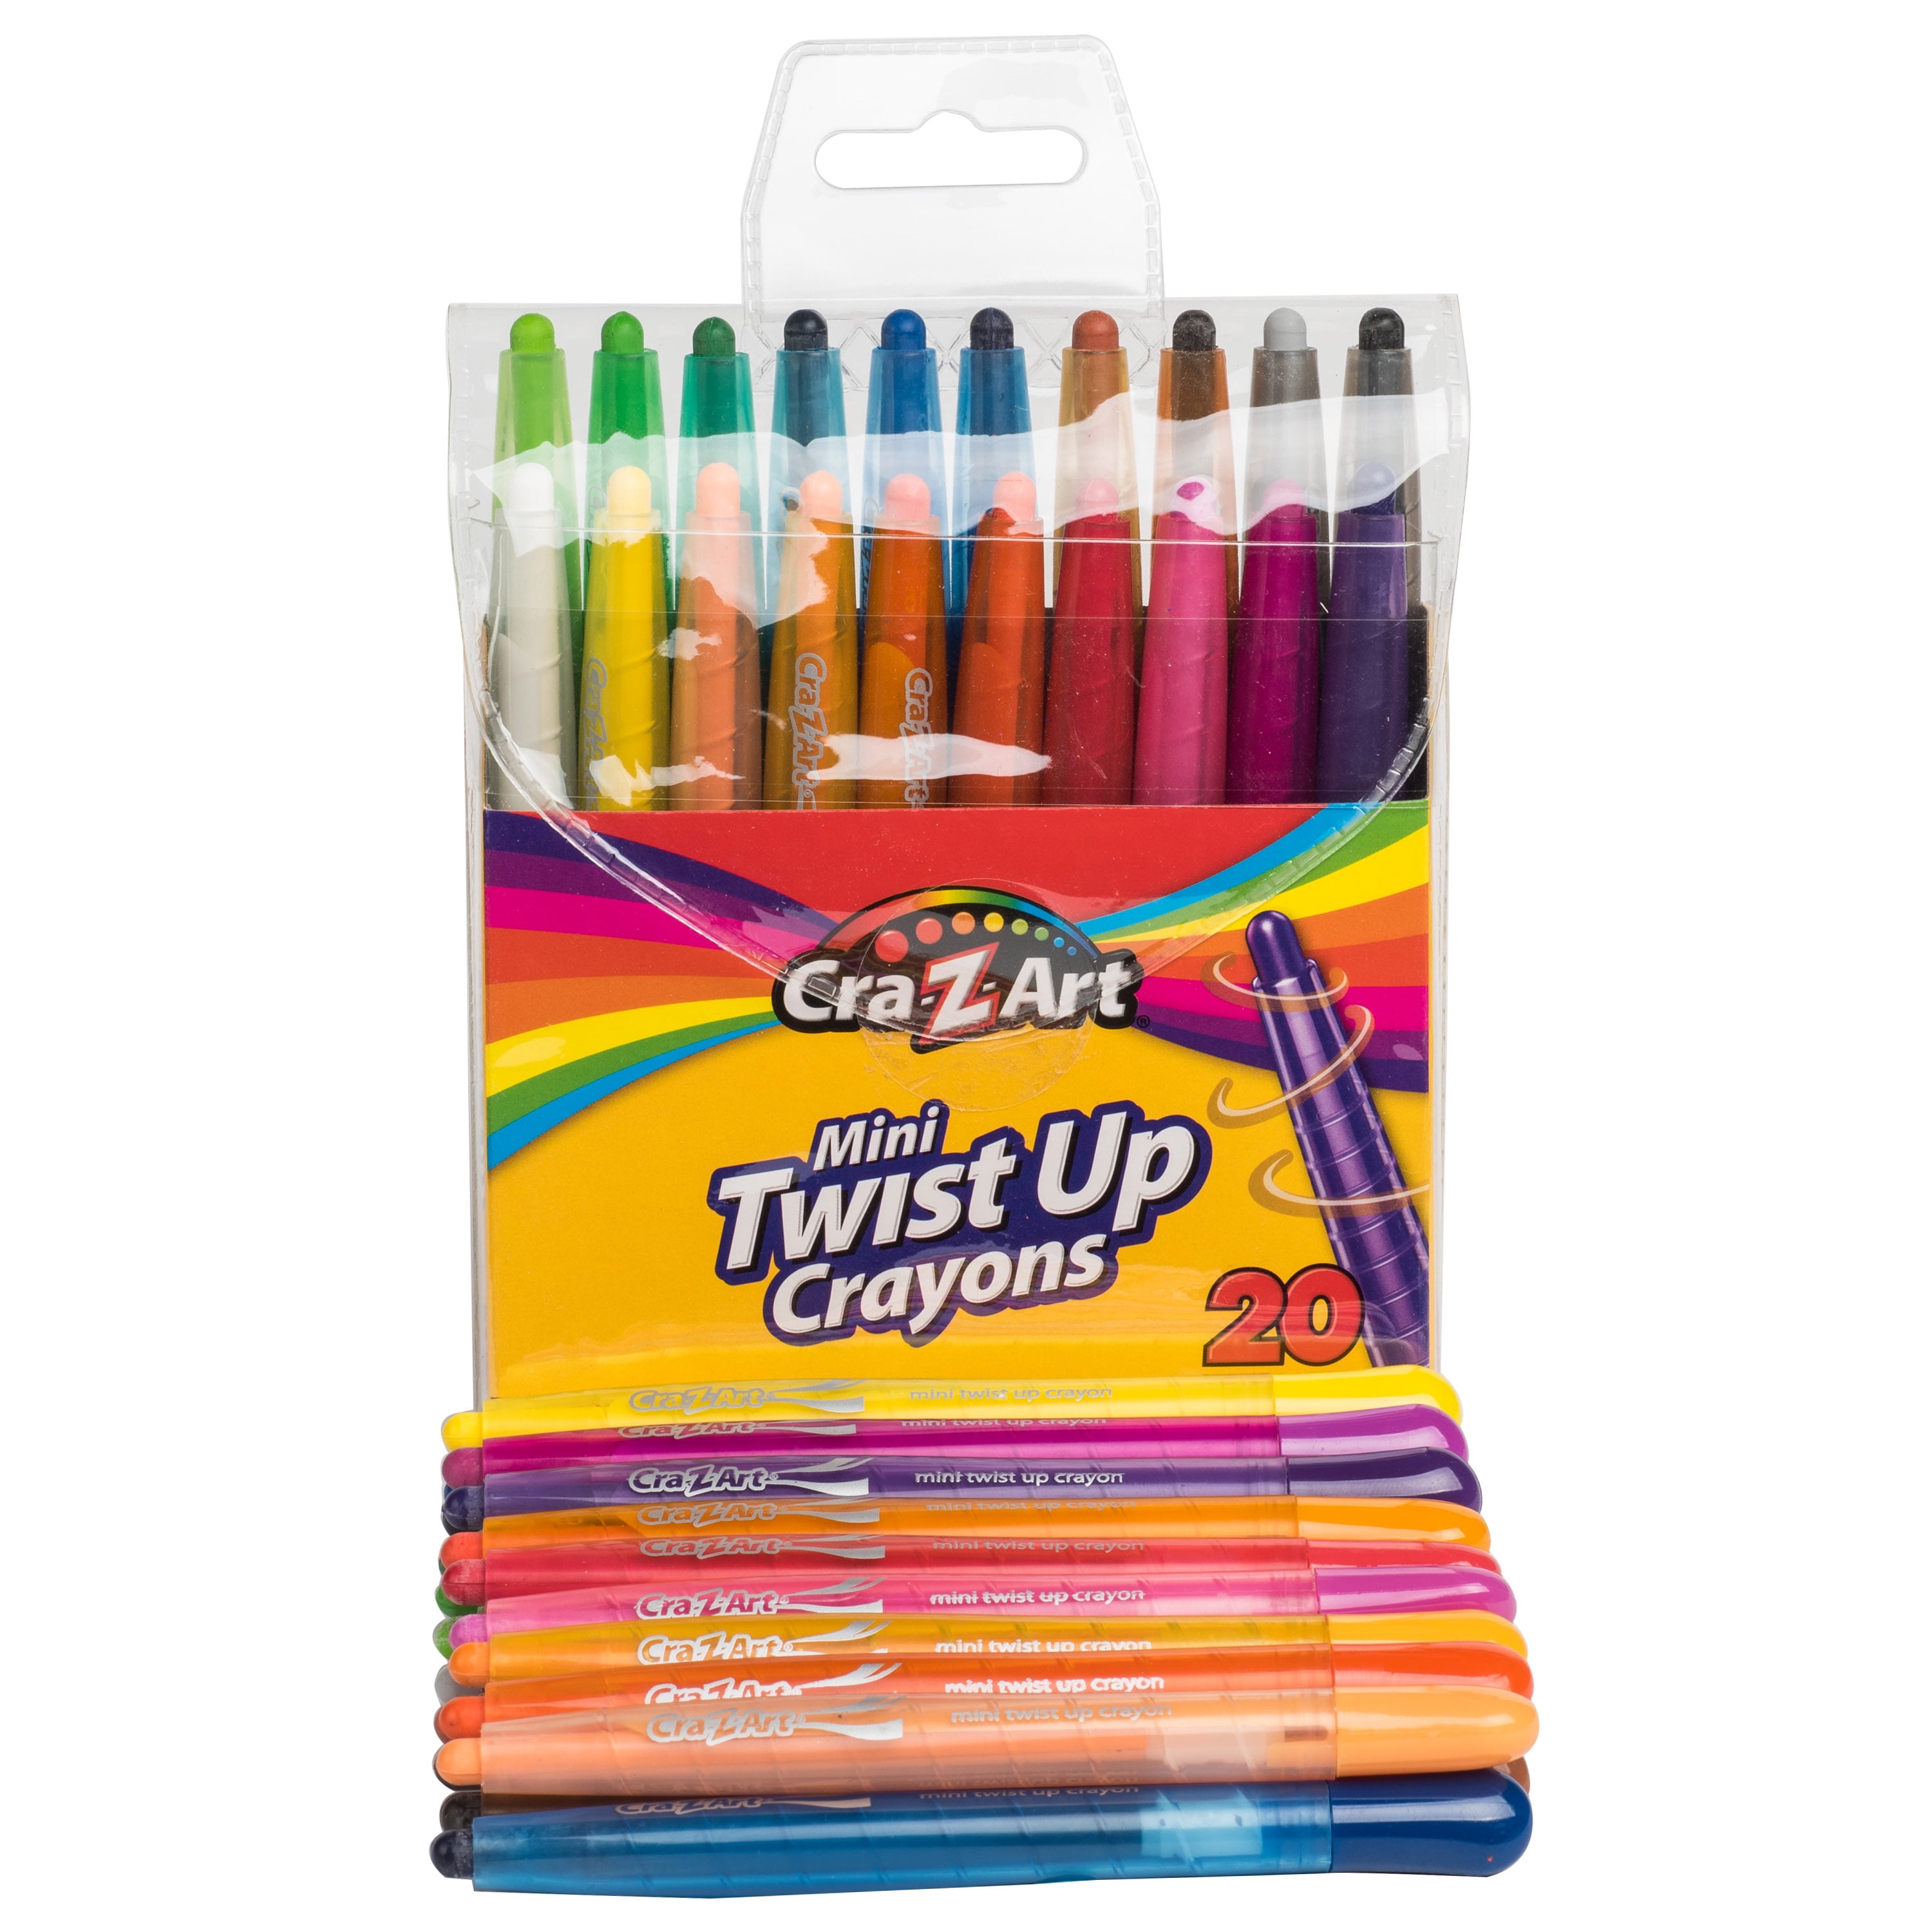 TWIST UP CRAYONS 10pc Twist up Crayons Stocking Stuffer Kids Coloring Book  Kids Crayon Gift Creative Arts & Crafts Supplies for Kids 